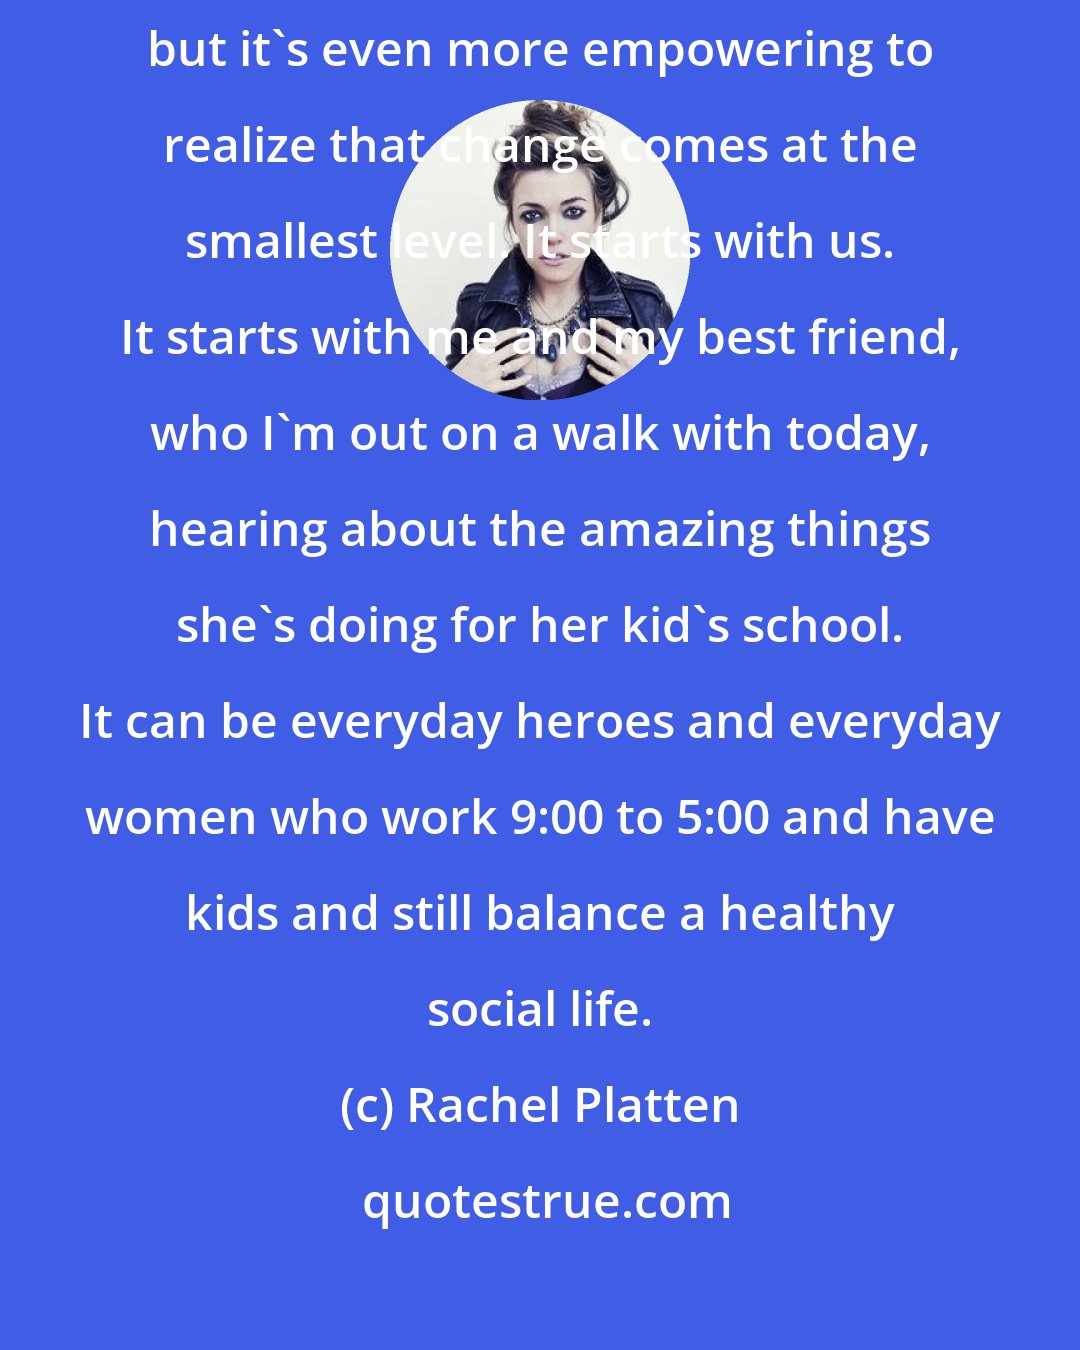 Rachel Platten: We all look up to these strong women who we see in magazines and on TV, but it's even more empowering to realize that change comes at the smallest level. It starts with us. It starts with me and my best friend, who I'm out on a walk with today, hearing about the amazing things she's doing for her kid's school. It can be everyday heroes and everyday women who work 9:00 to 5:00 and have kids and still balance a healthy social life.